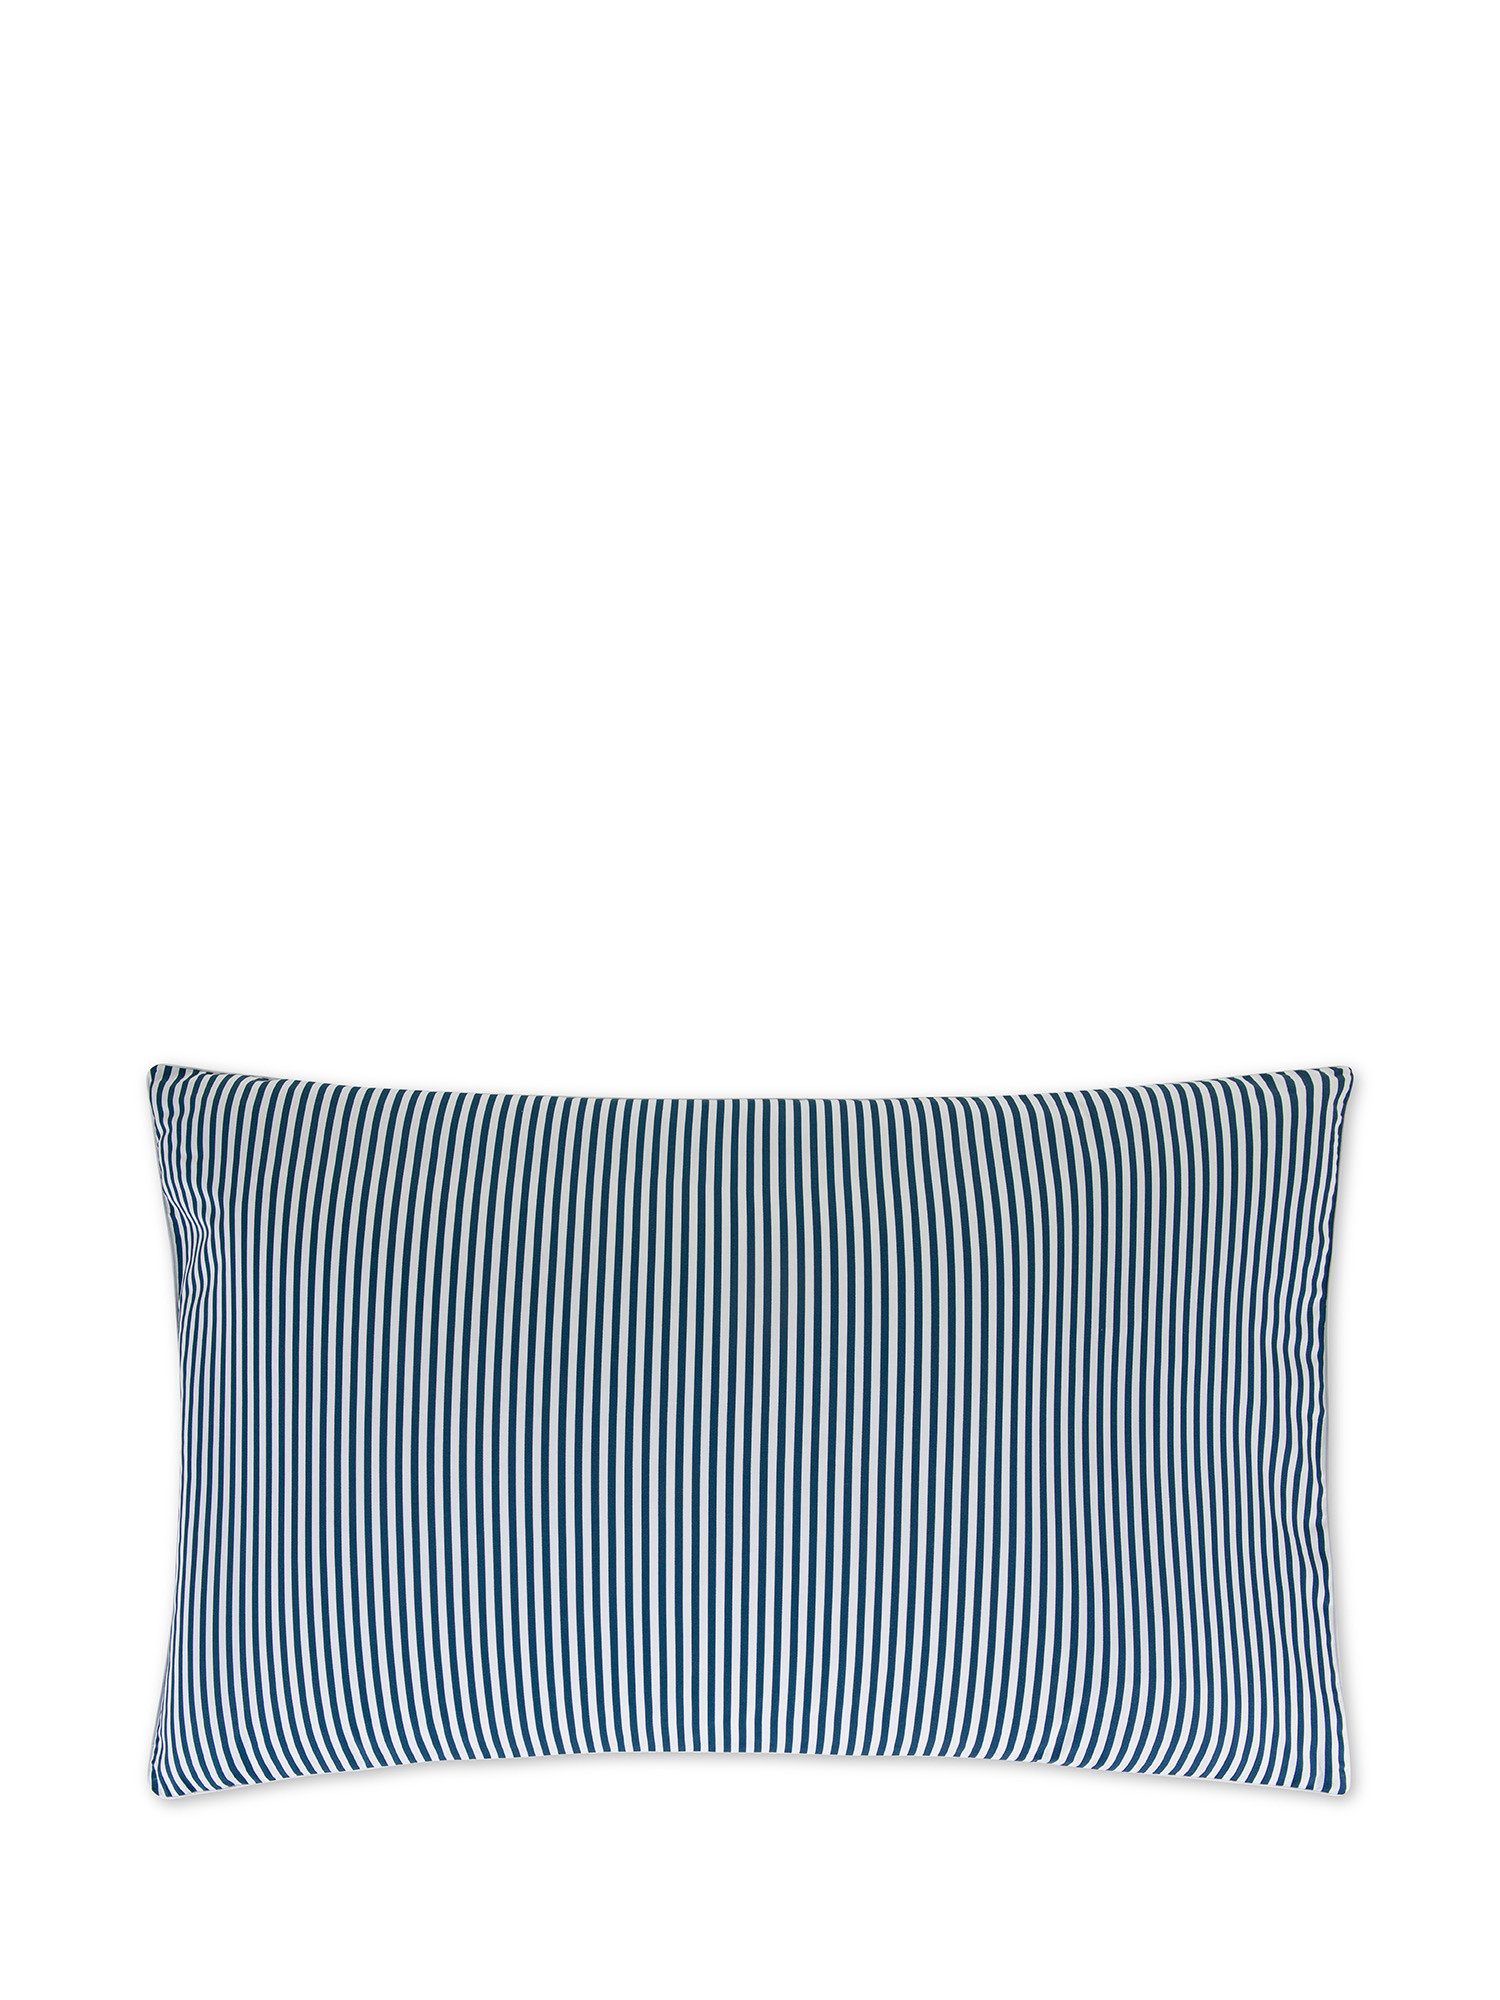 Printed cotton percale pillowcase, White / Blue, large image number 0